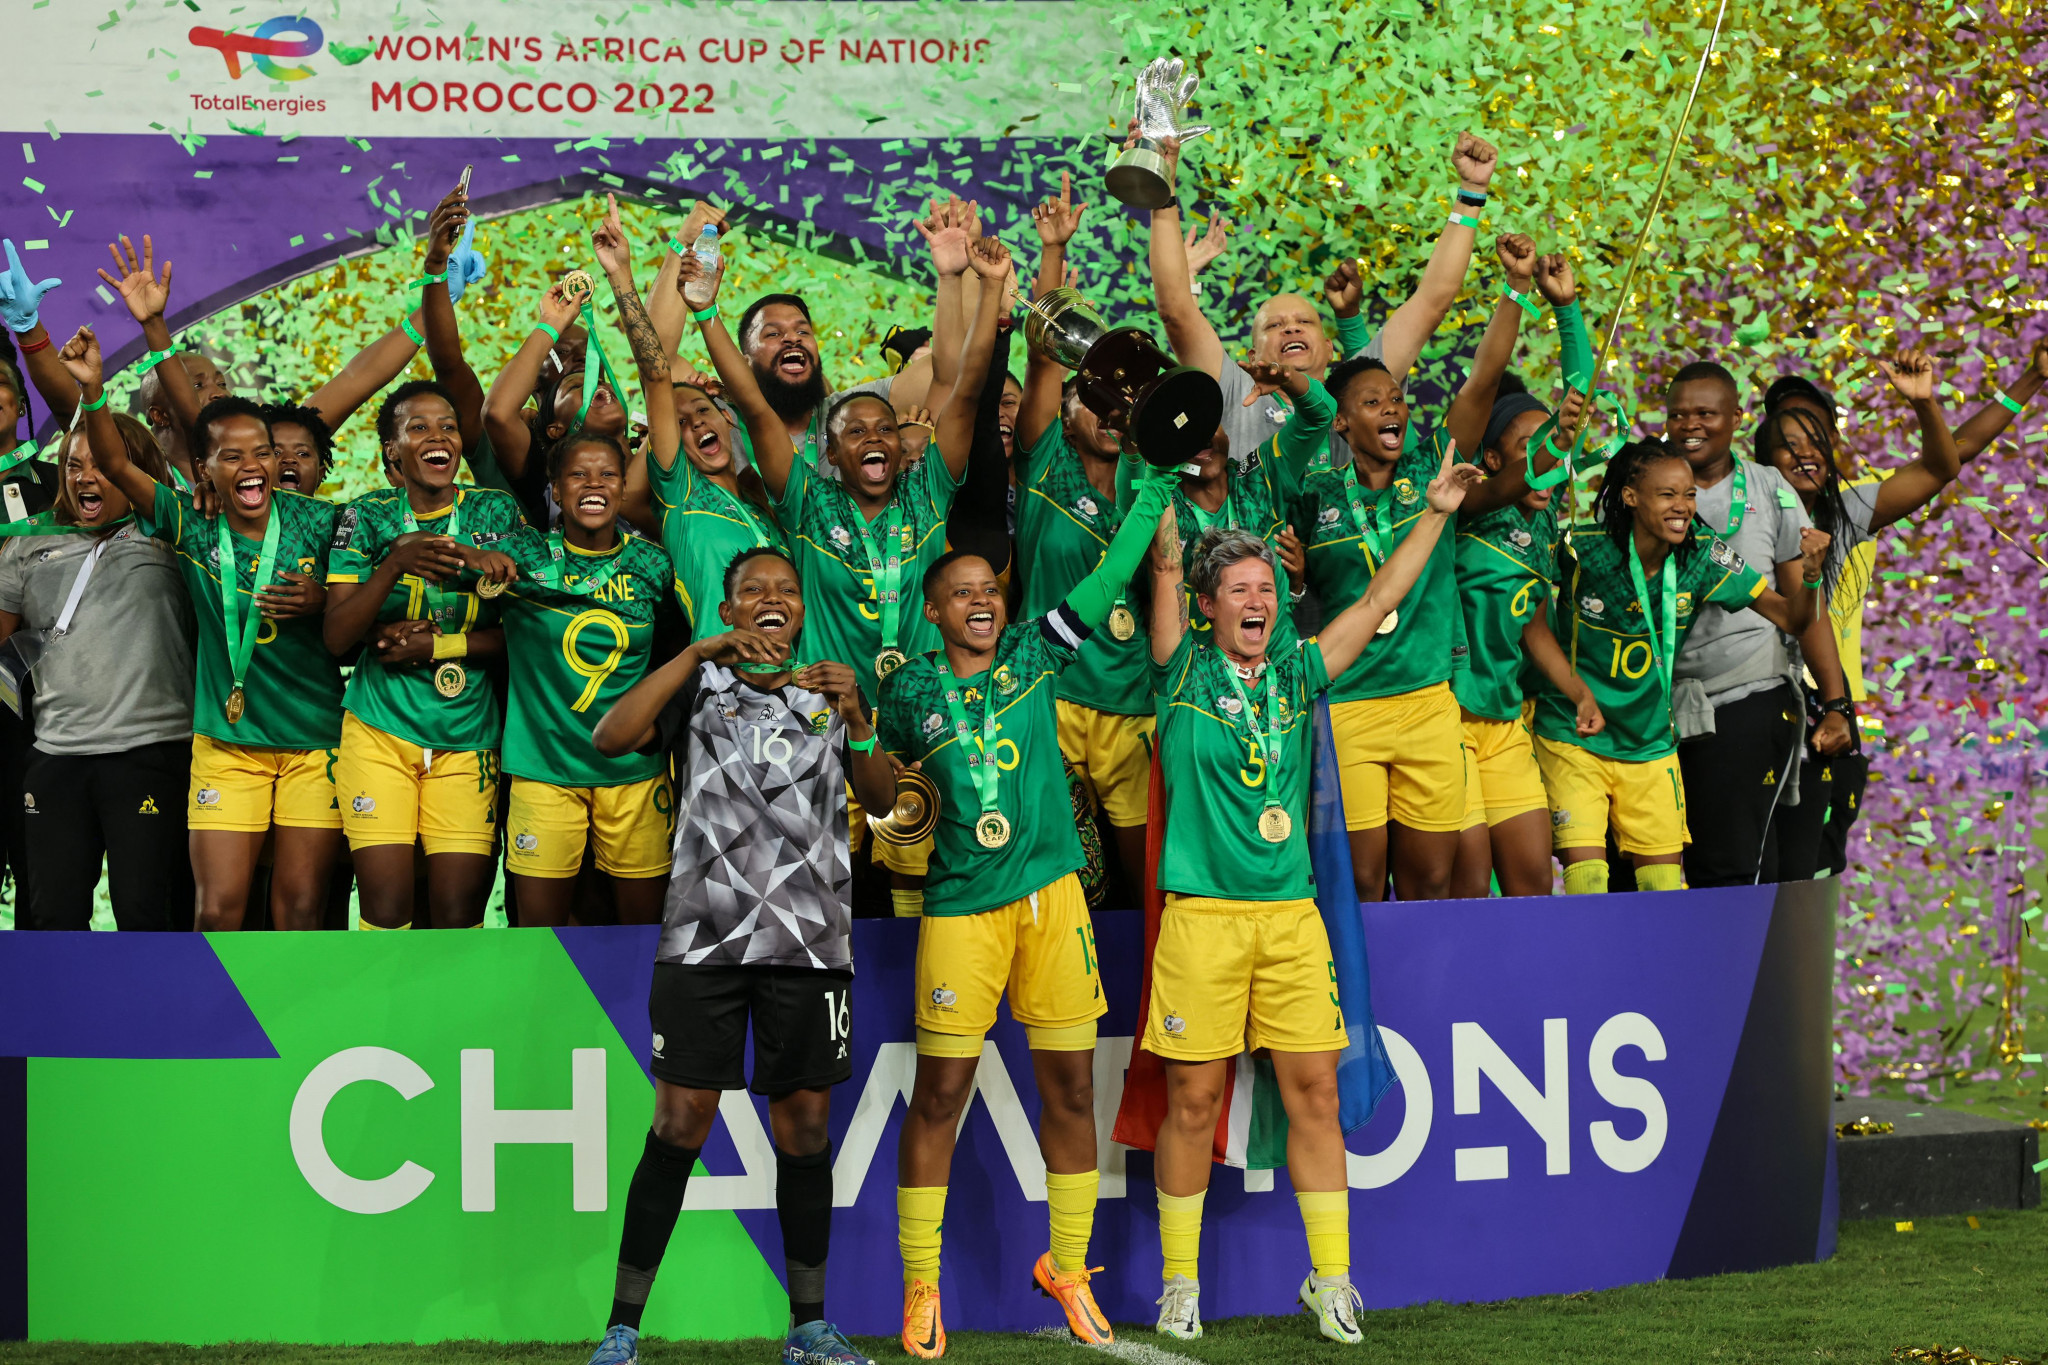 South Africa celebrate after winning a first ever Women's Africa Cup of Nations football title, beating Morocco 2-1 in Rabat ©Getty Images